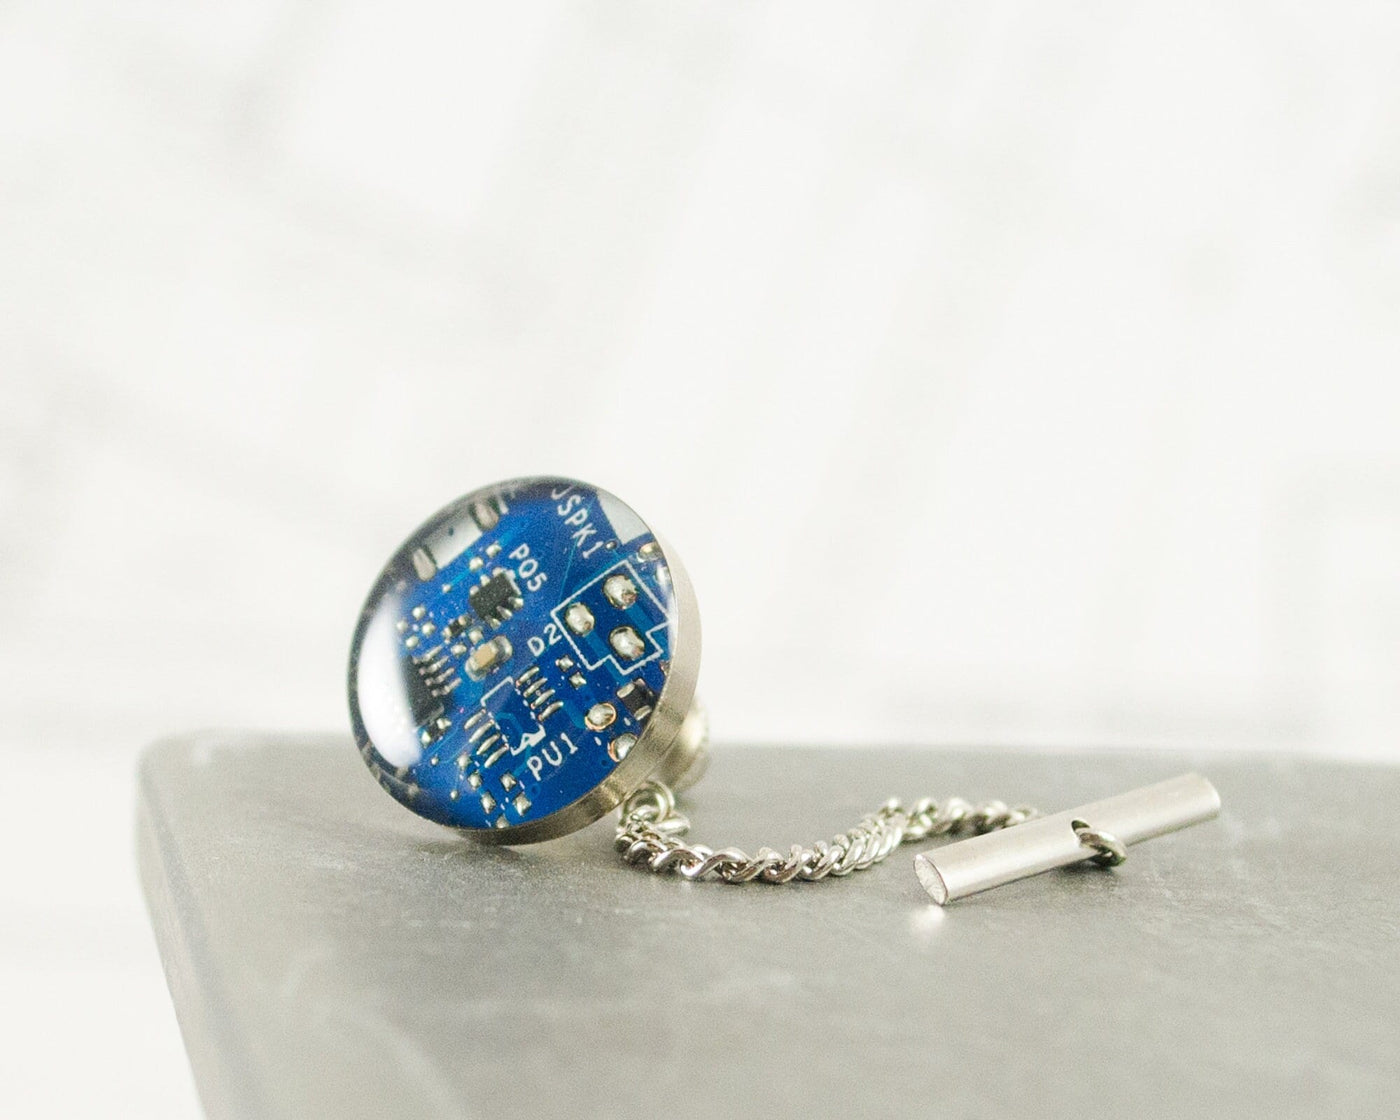 Blue Circuit Board Tie Tack, Technology Jewelry, Electrical Engineer Graduation Gift, Computer Scientist Gift, Techie Tie Jewelry